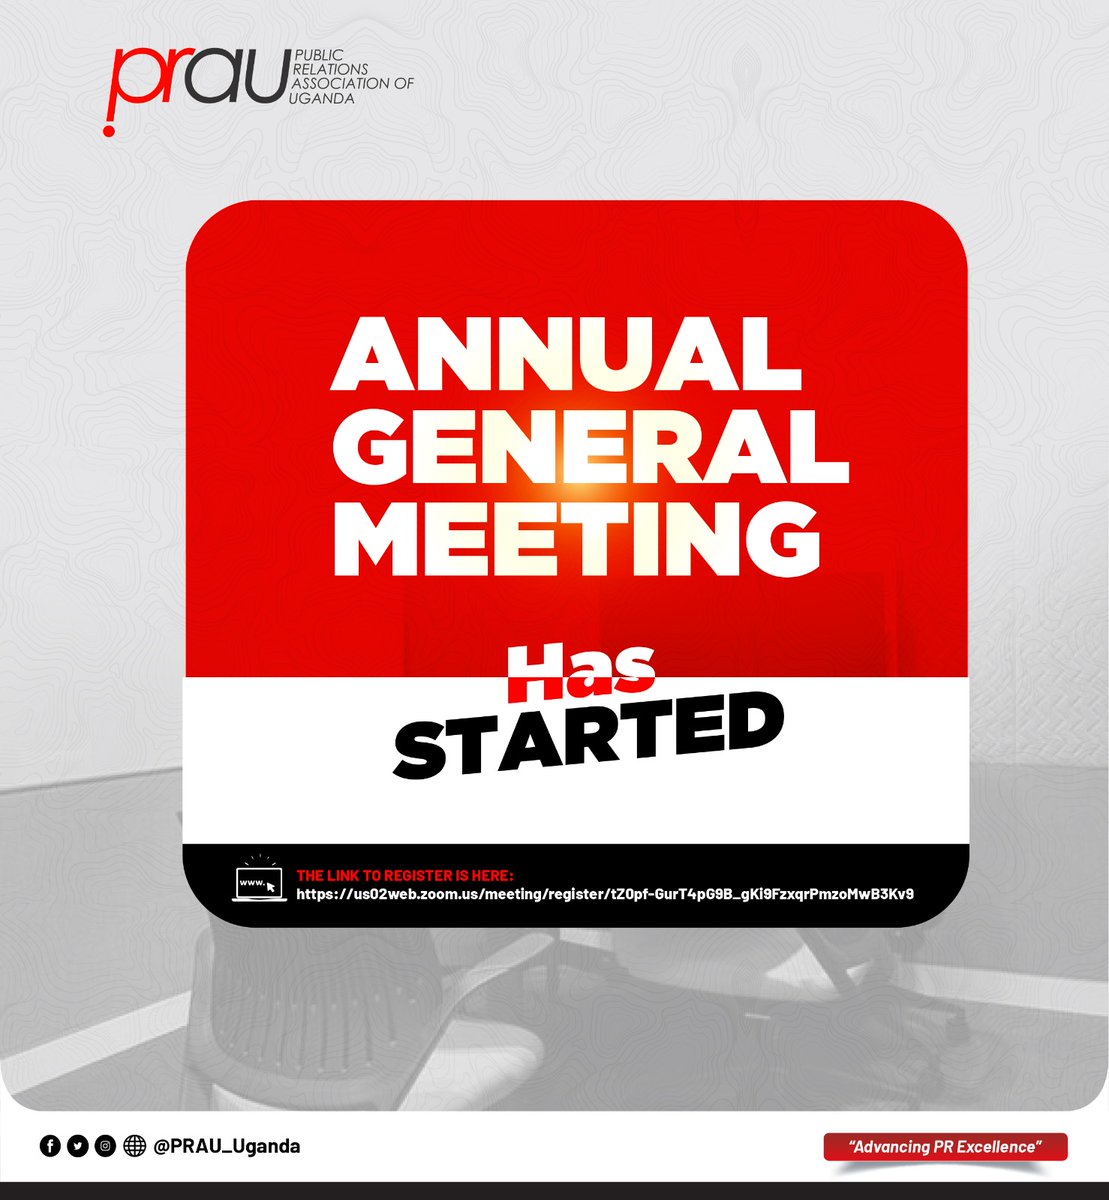 The Annual General Meeting is in motion. Join us online to contribute and follow the discussion. #AGM